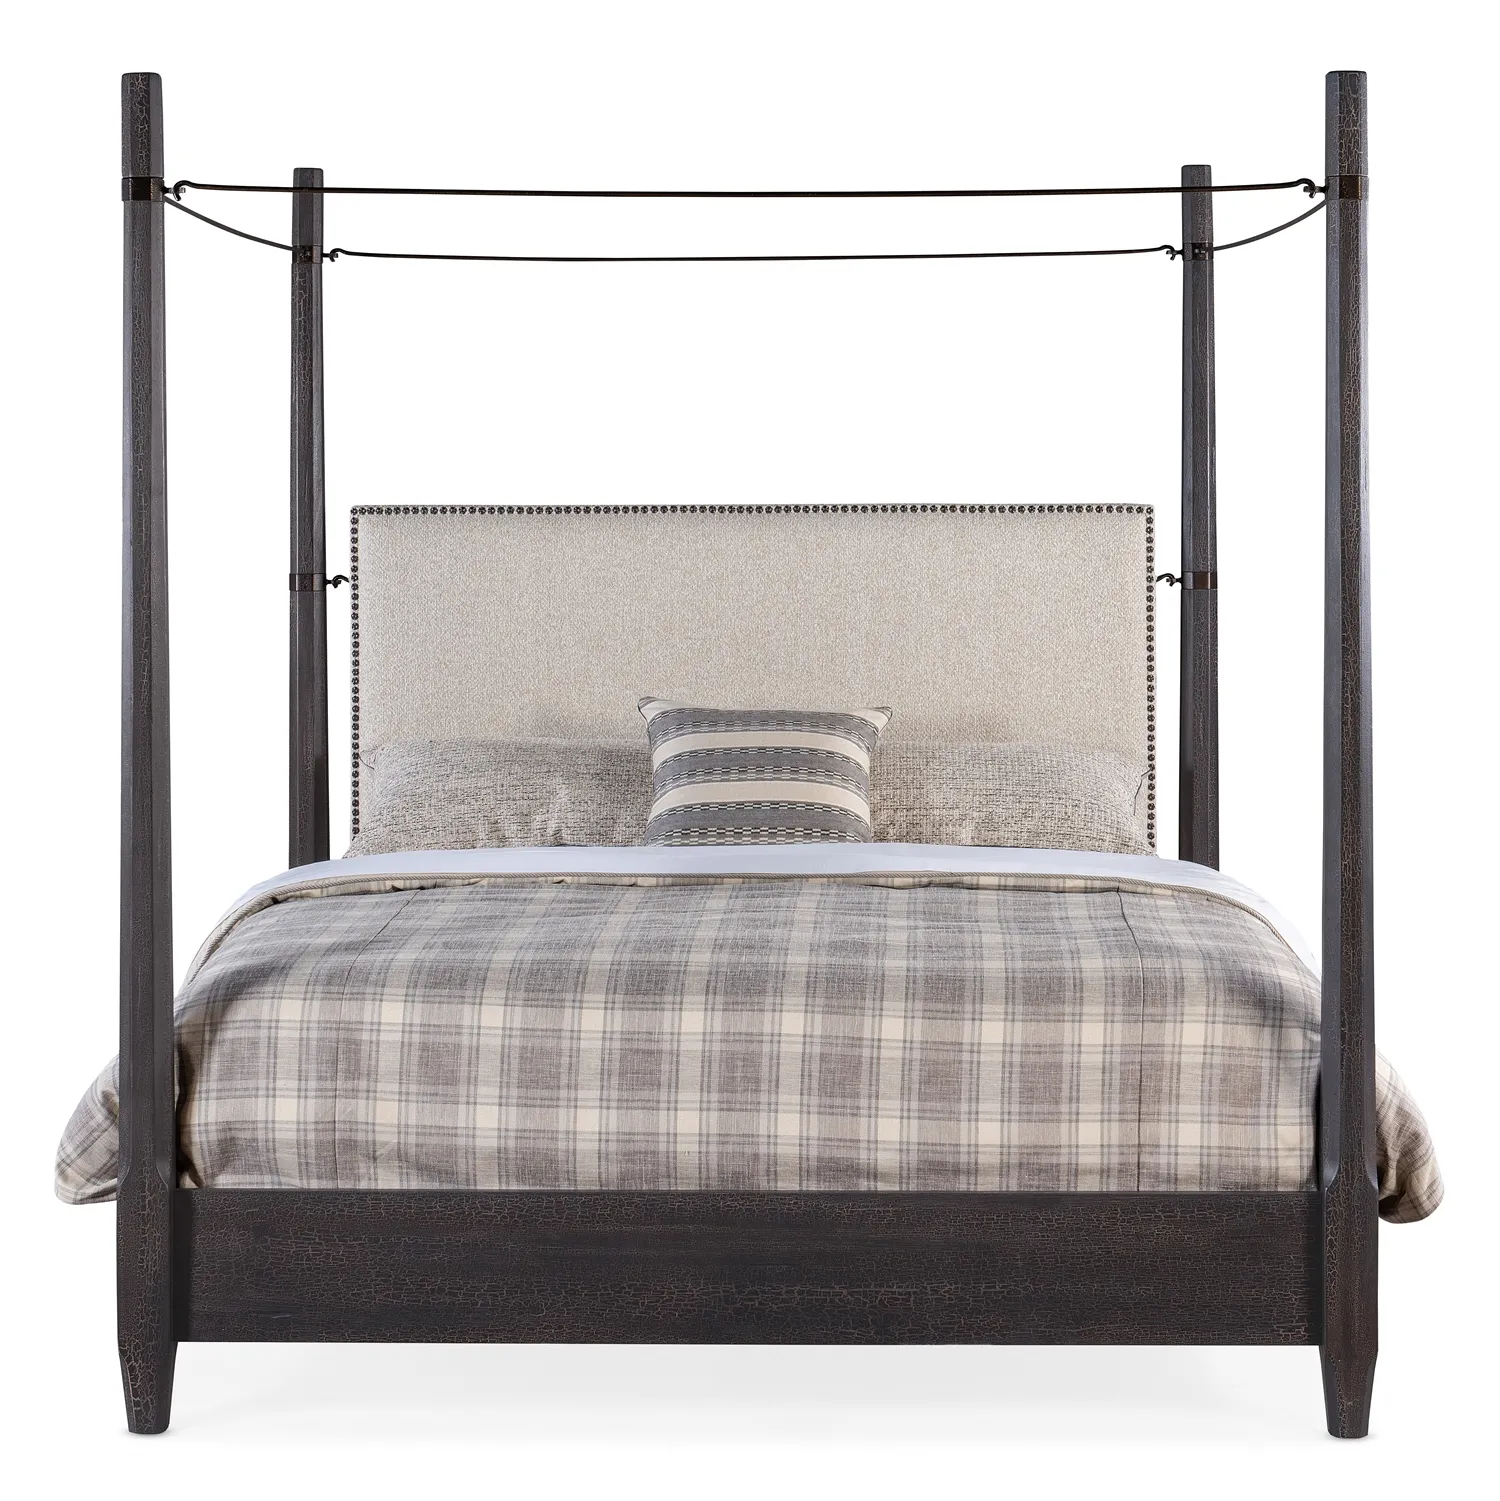 BIG SKY CALIFORNIA KING POSTER BED WITH CANOPY